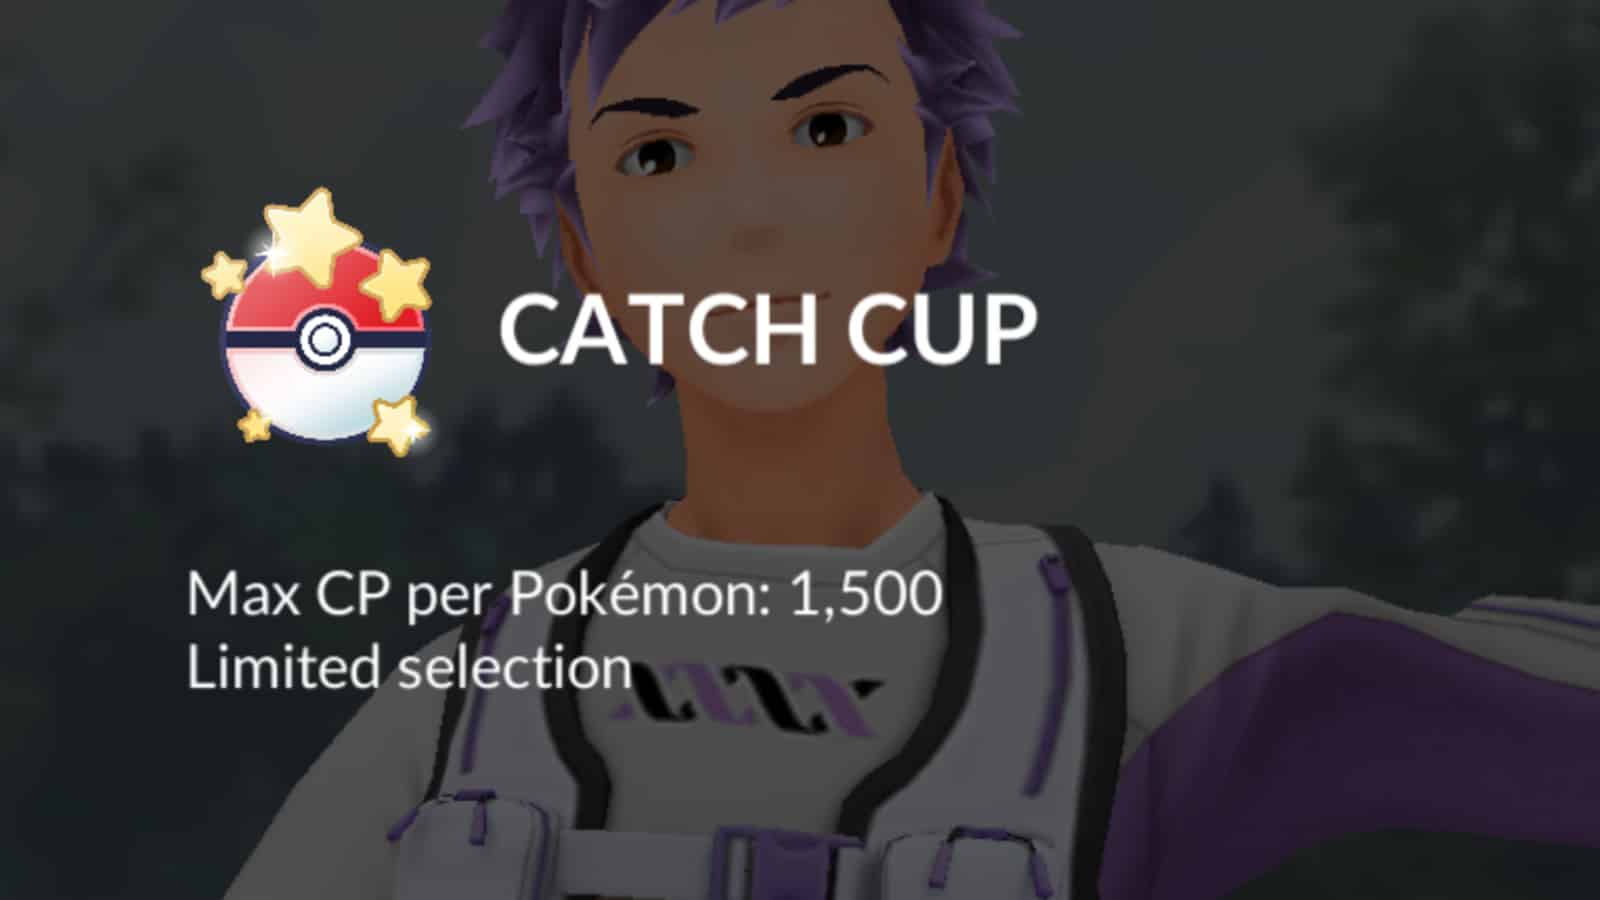 The Catch Cup rules screen in Pokemon Go